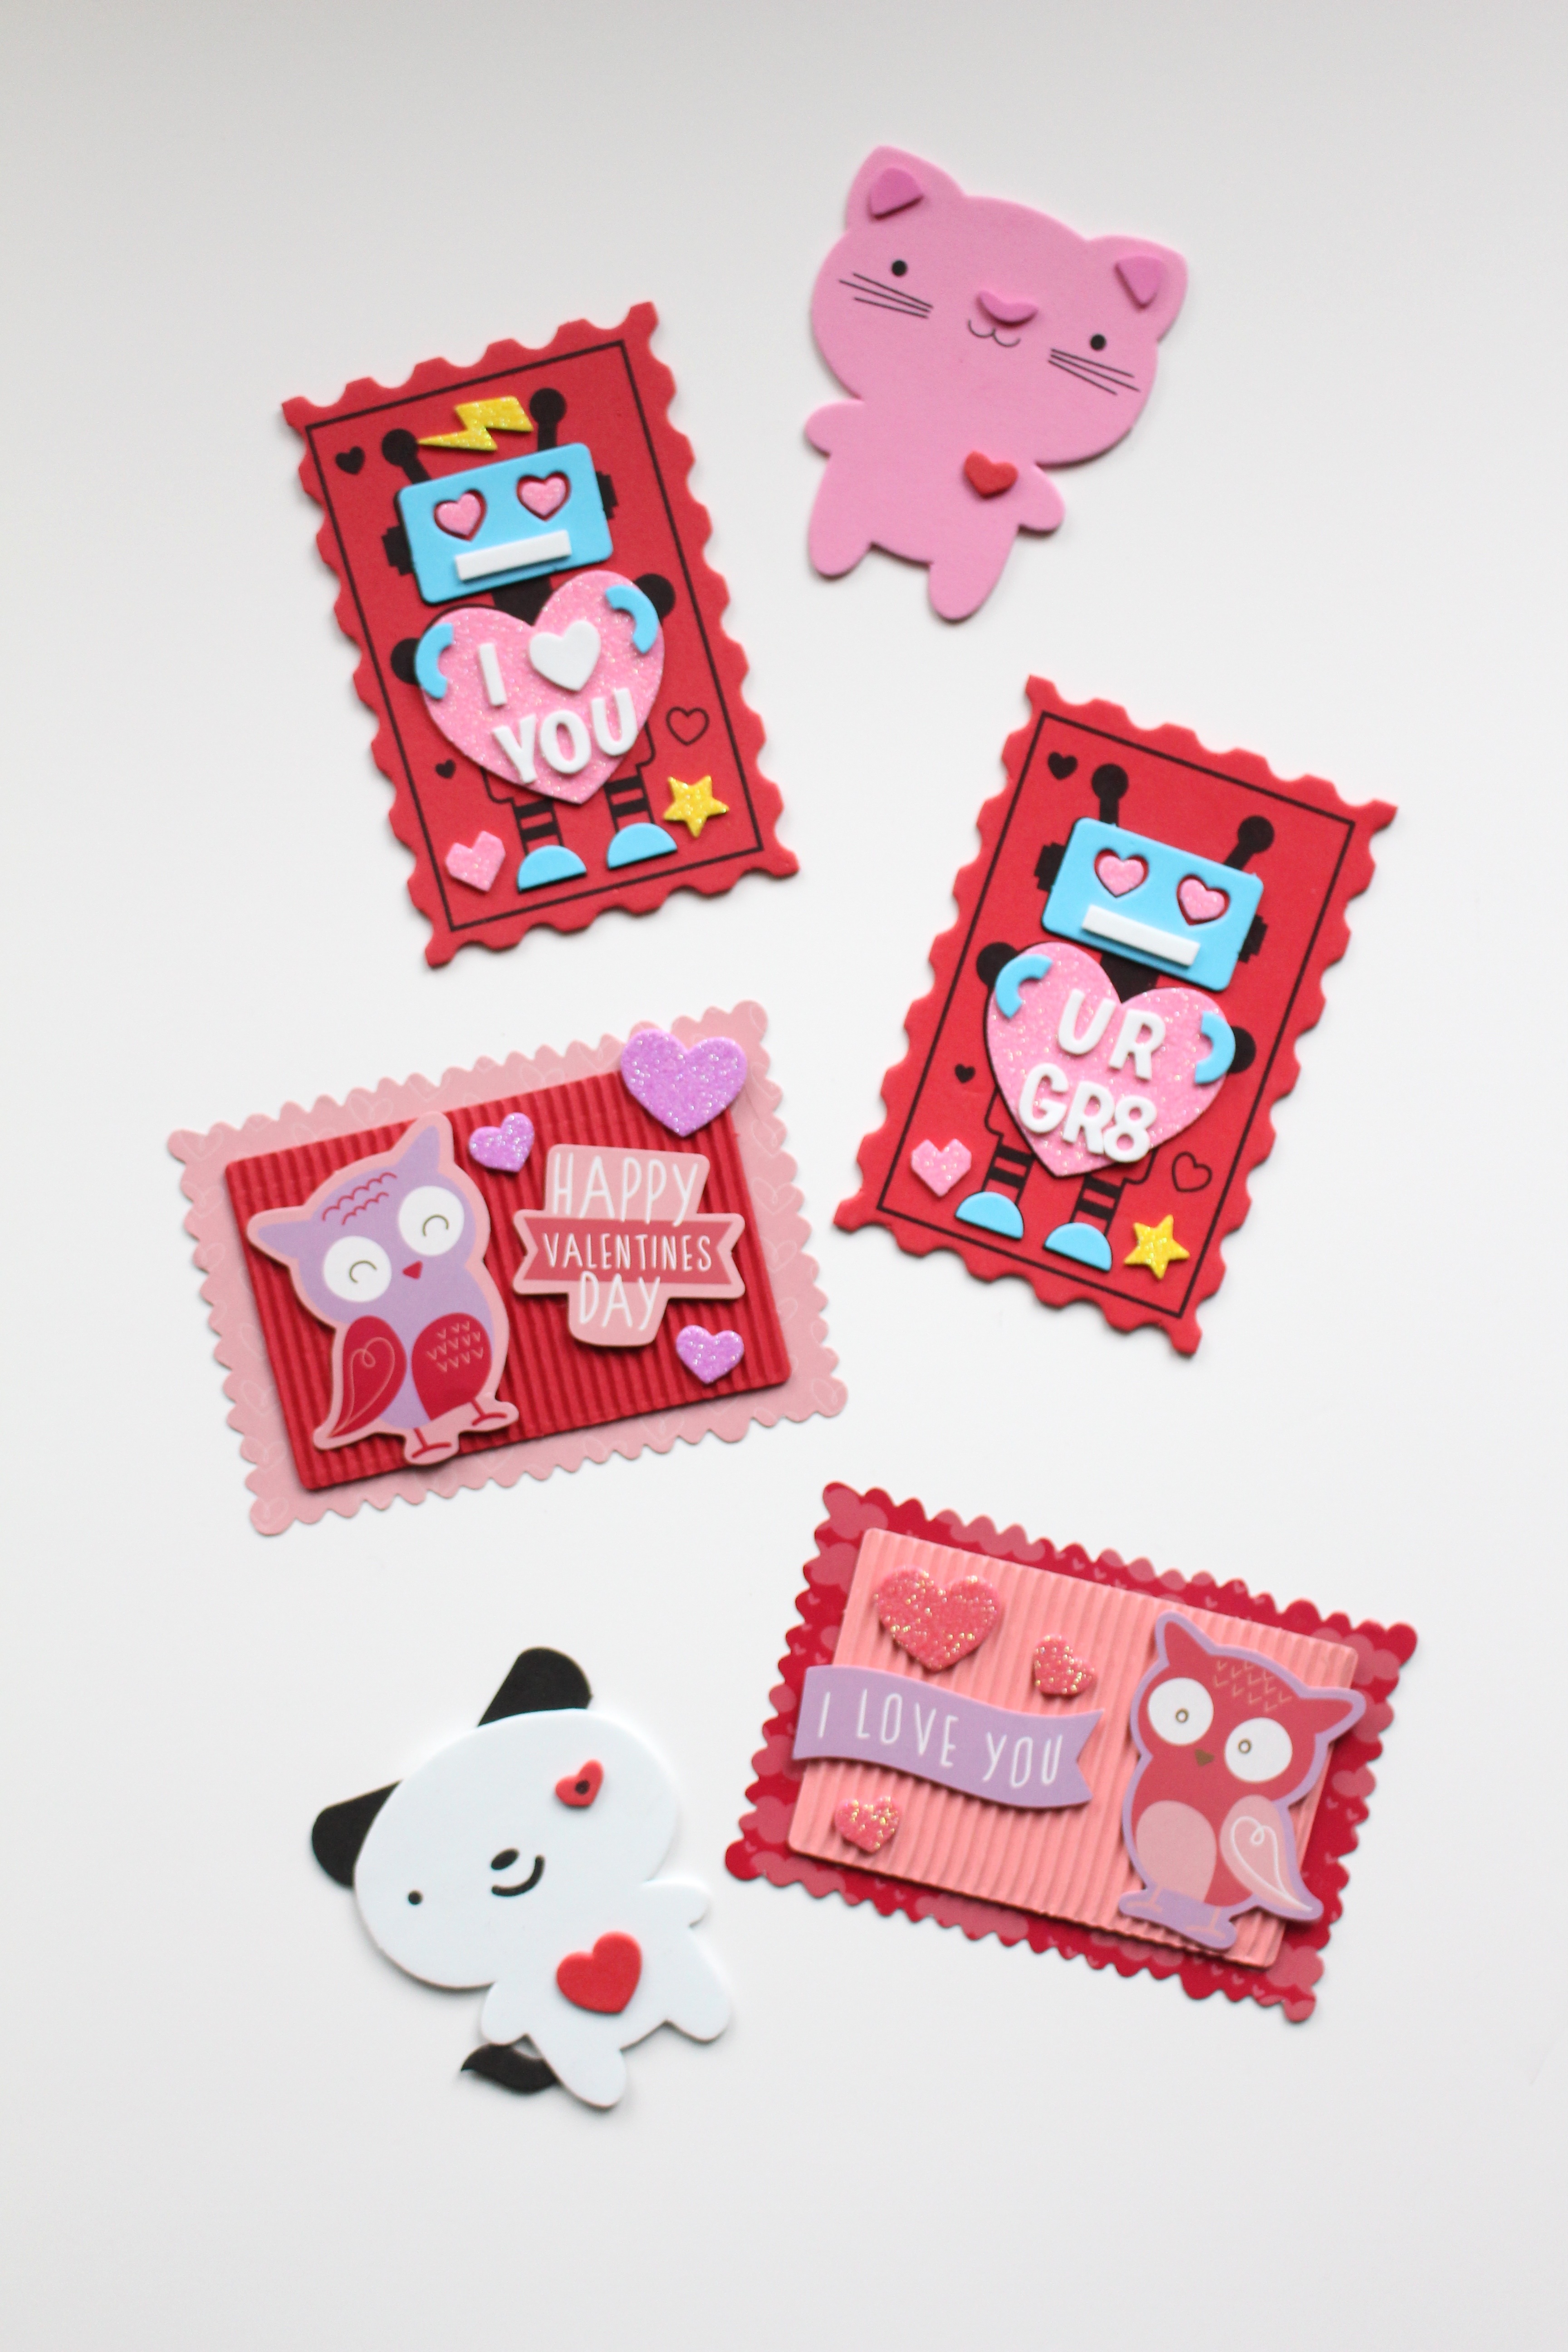 the-35-best-ideas-for-valentine-s-day-gift-ideas-for-kids-best